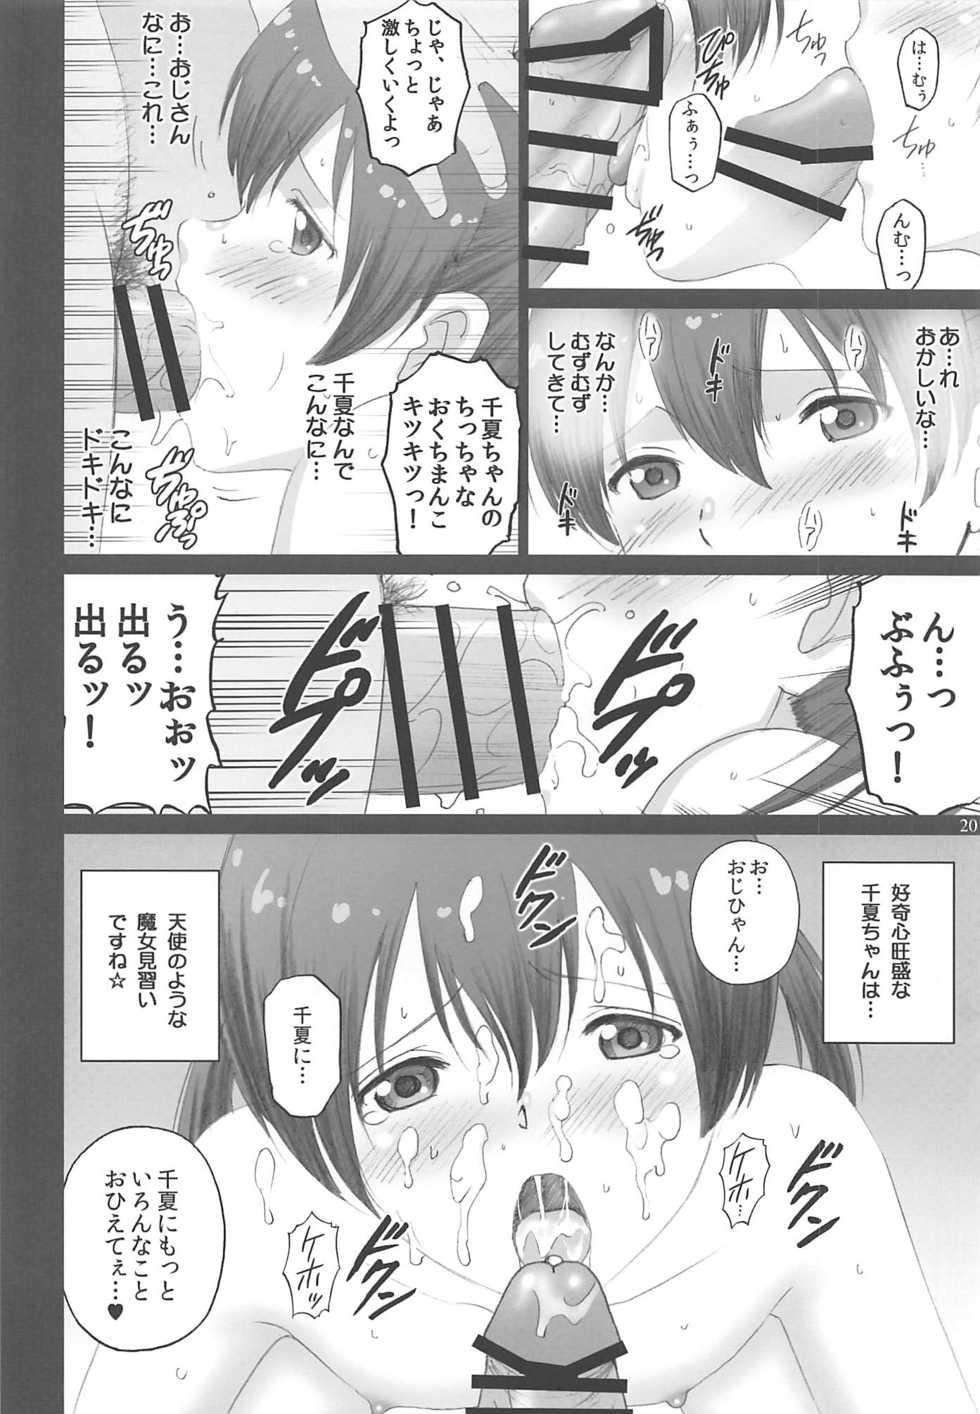 [ACTIVA (SMAC)] Fellaing Witch (Flying Witch) [2016-08-28] - Page 19